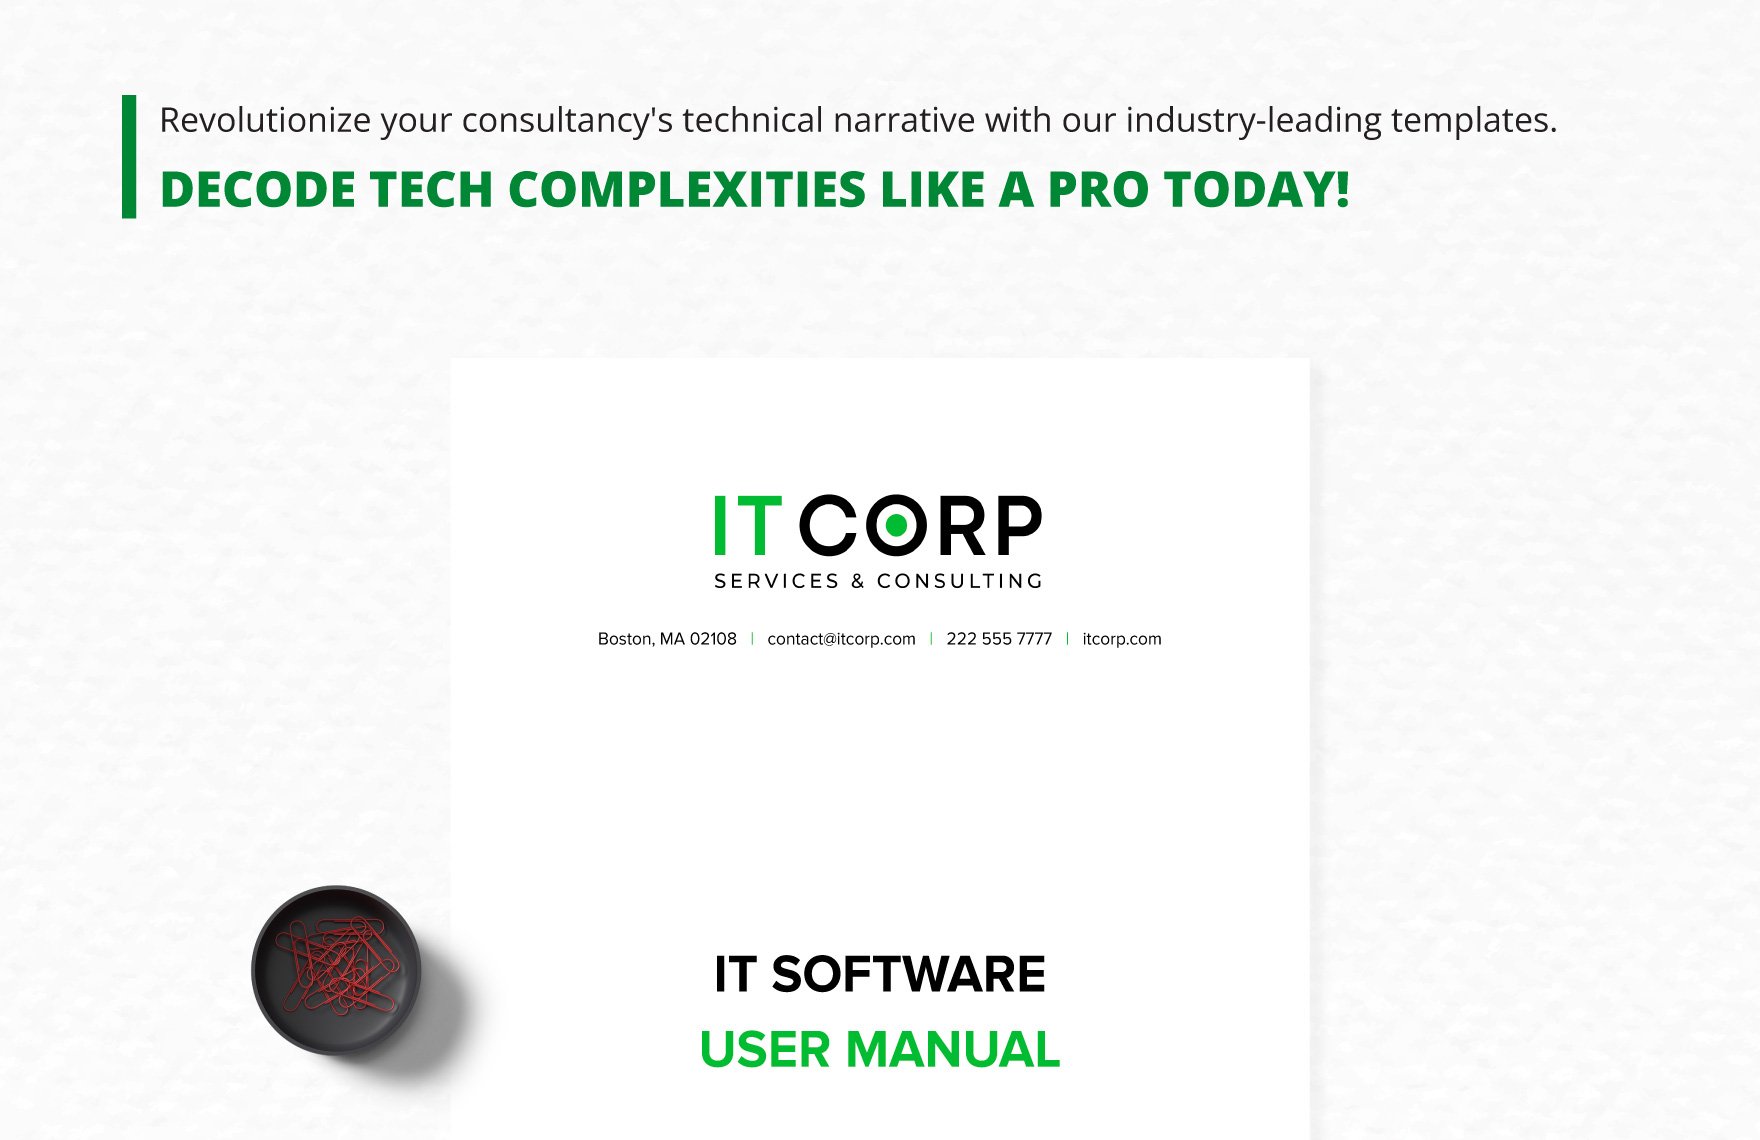 IT Software User Manual Template